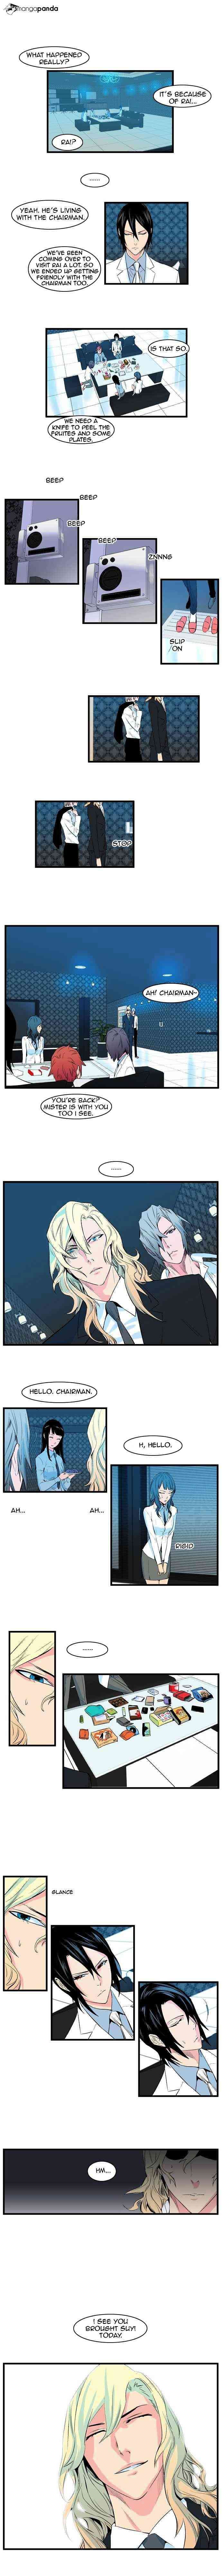 Noblesse Chapter 97 page 2